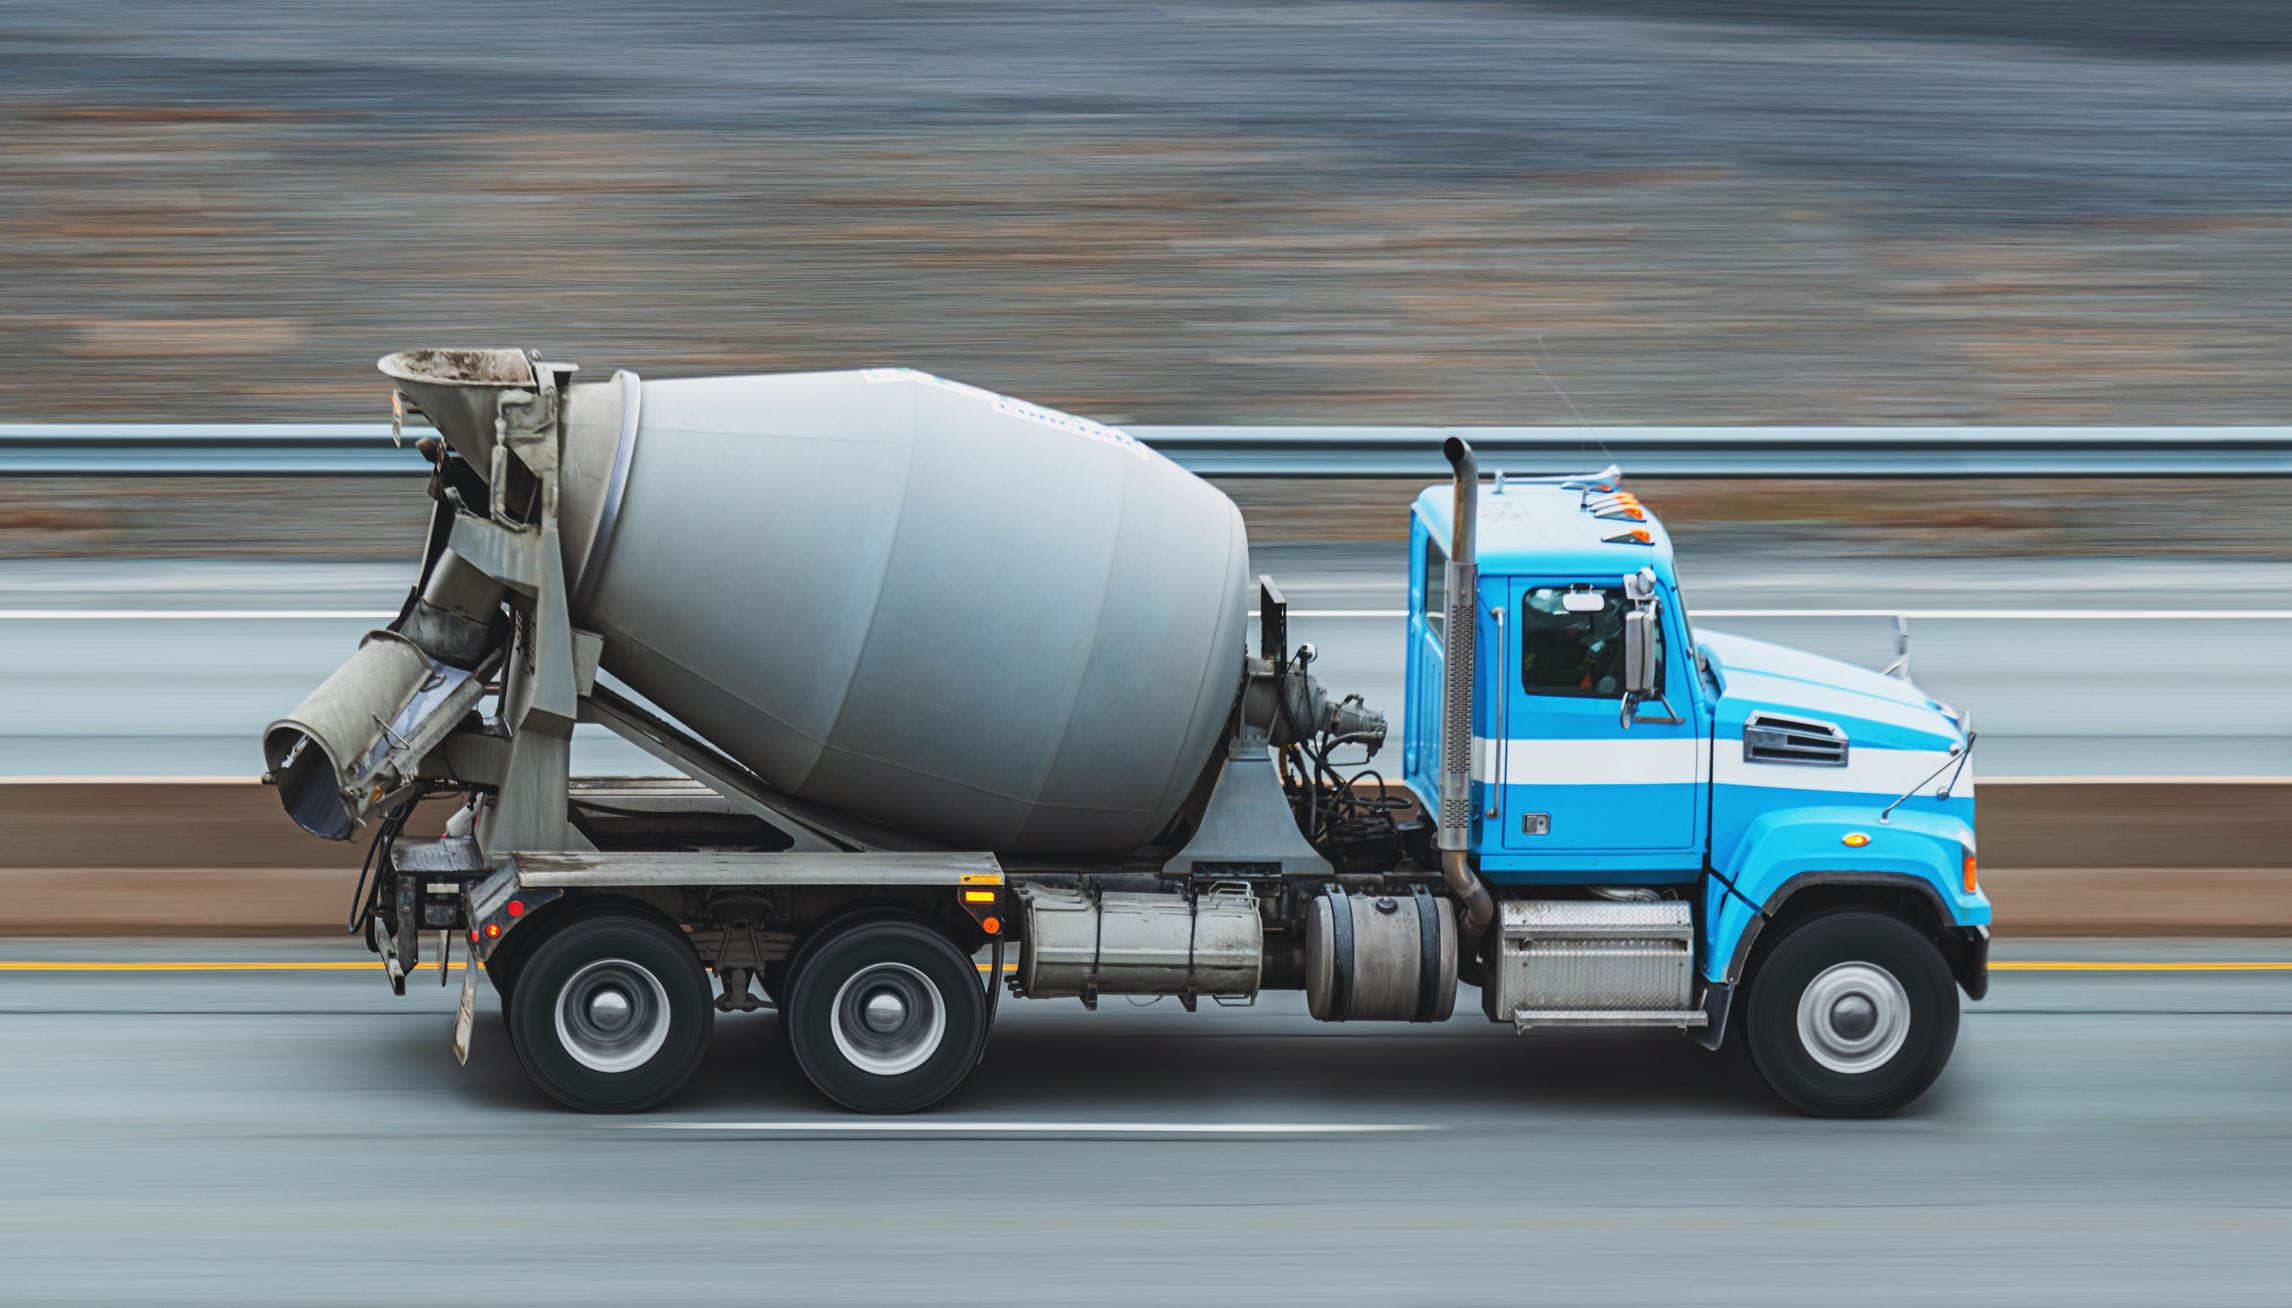 Cement Truck Accident Lawyer | Houston Cement Truck Injury Lawyer